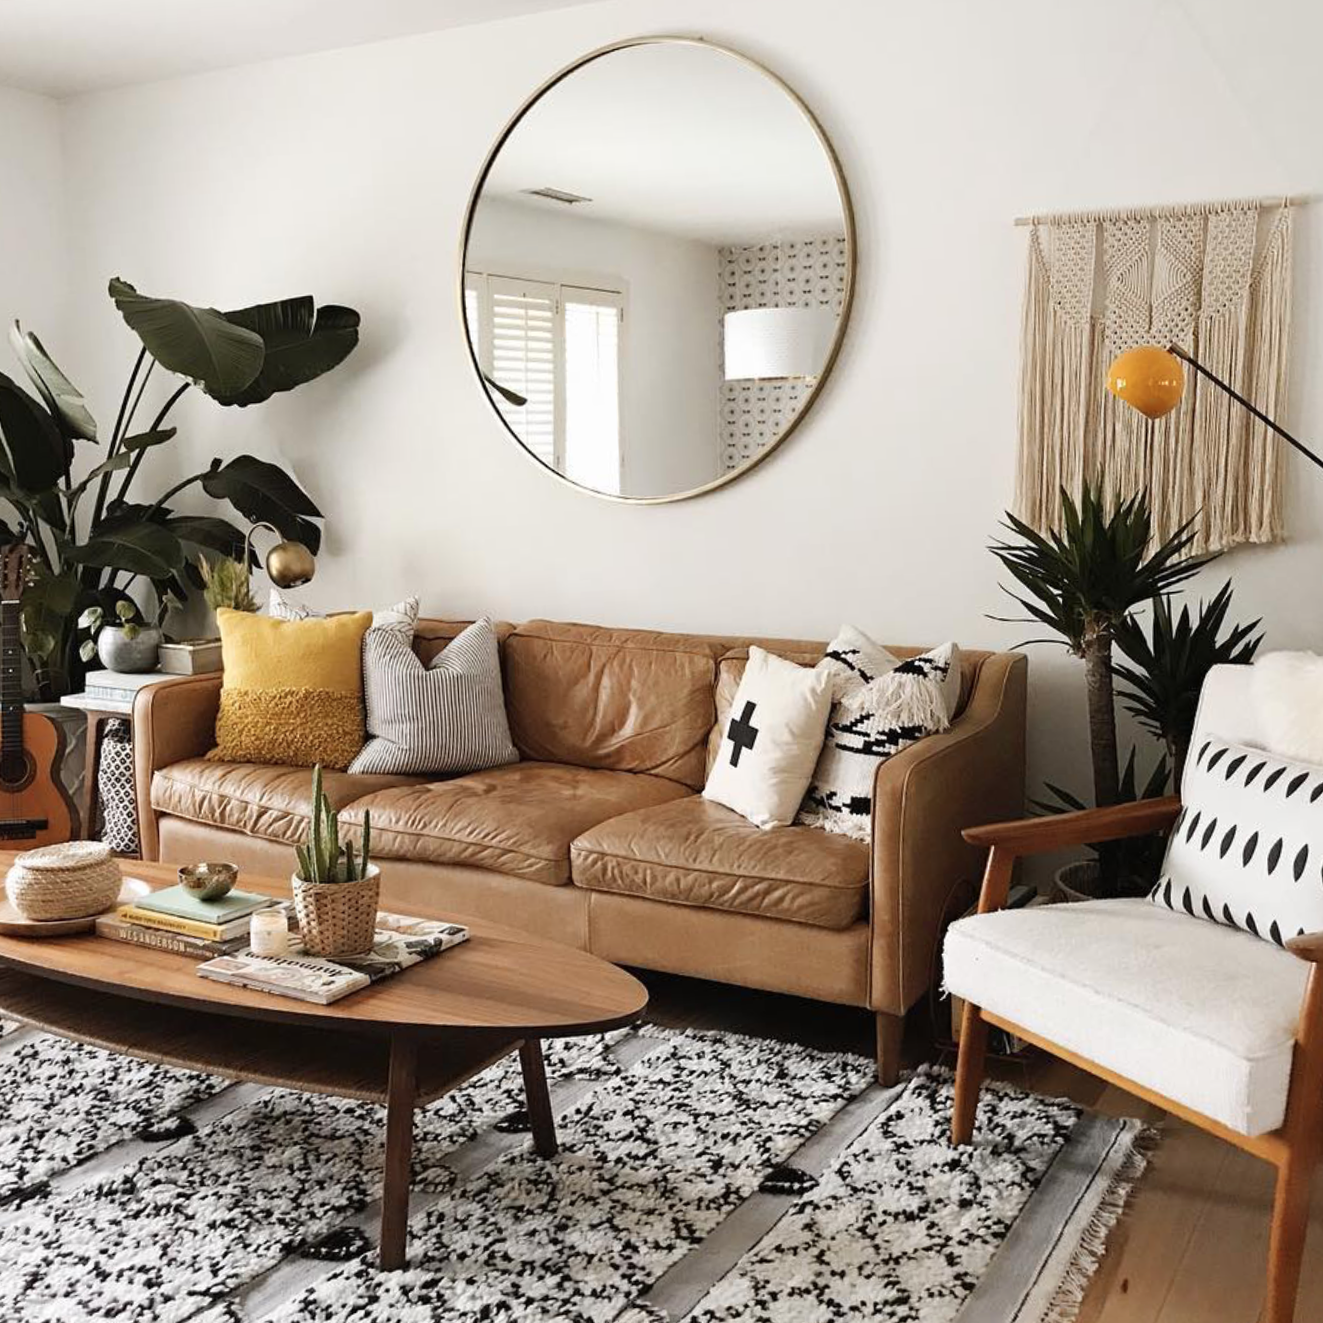 7 Apartment Decorating and Small Living Room Ideas | The ...